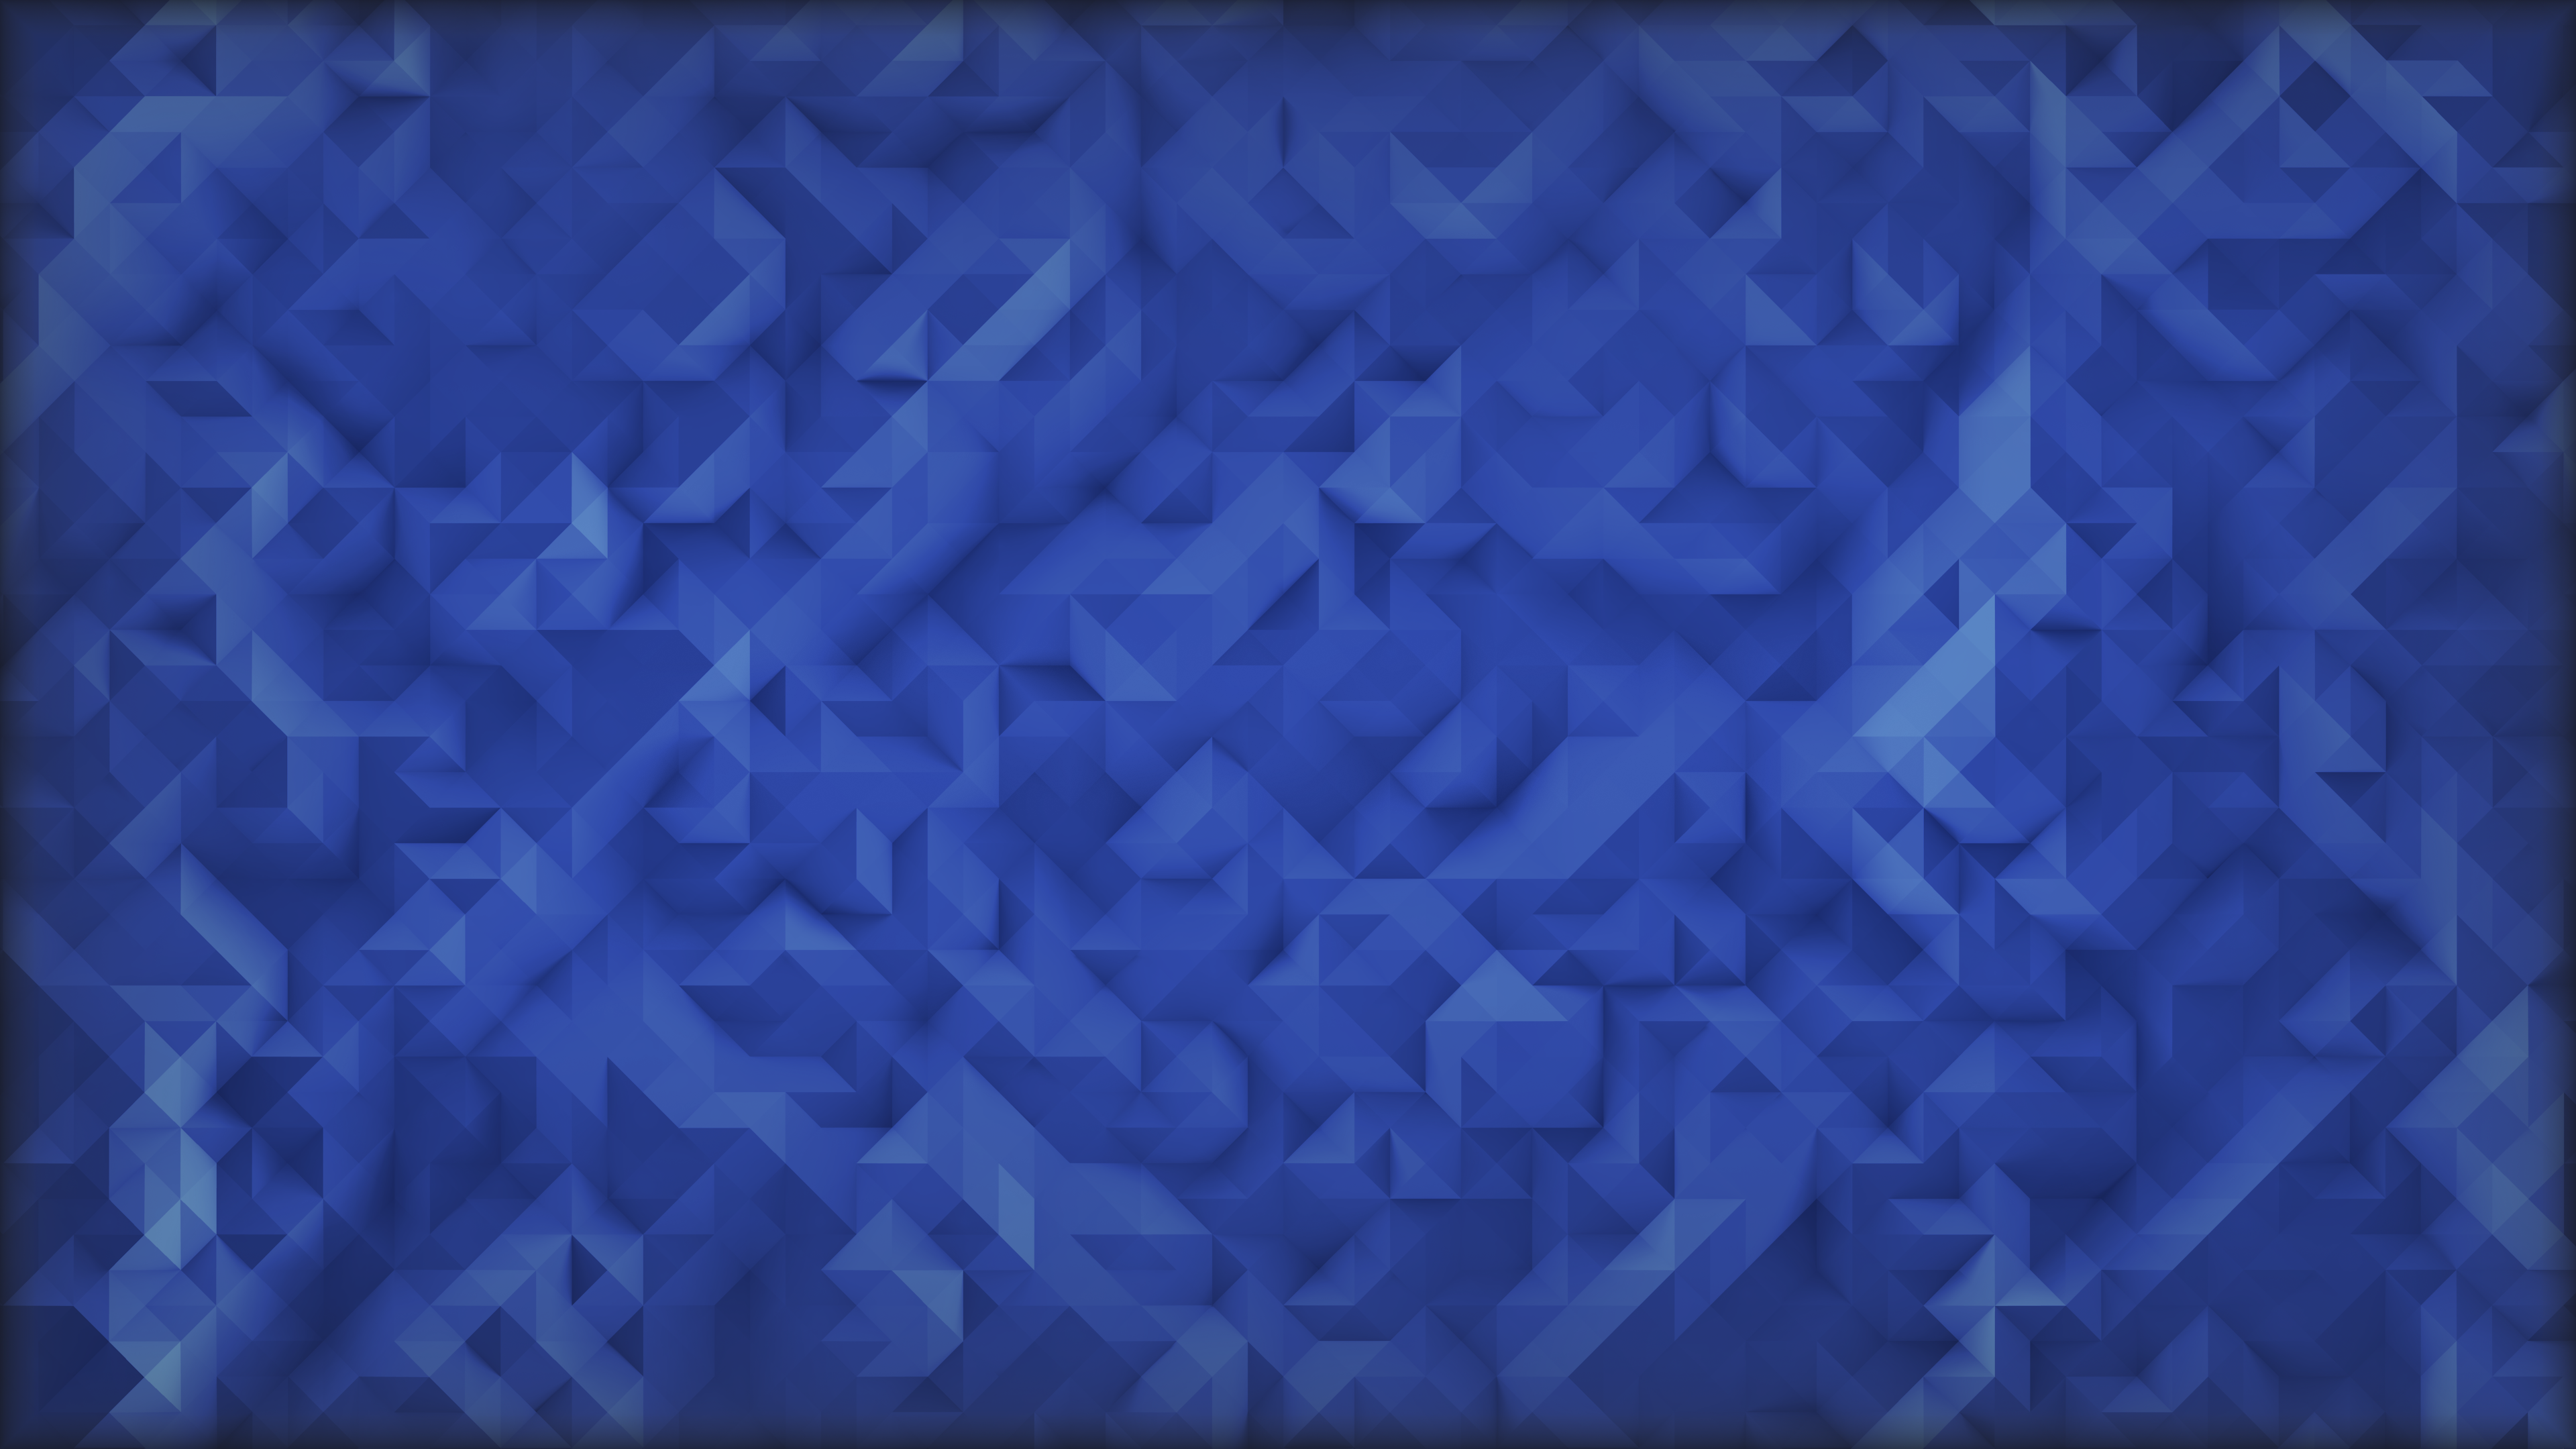 General 3840x2160 digital art low poly minimalism 2D triangle abstract blue background texture